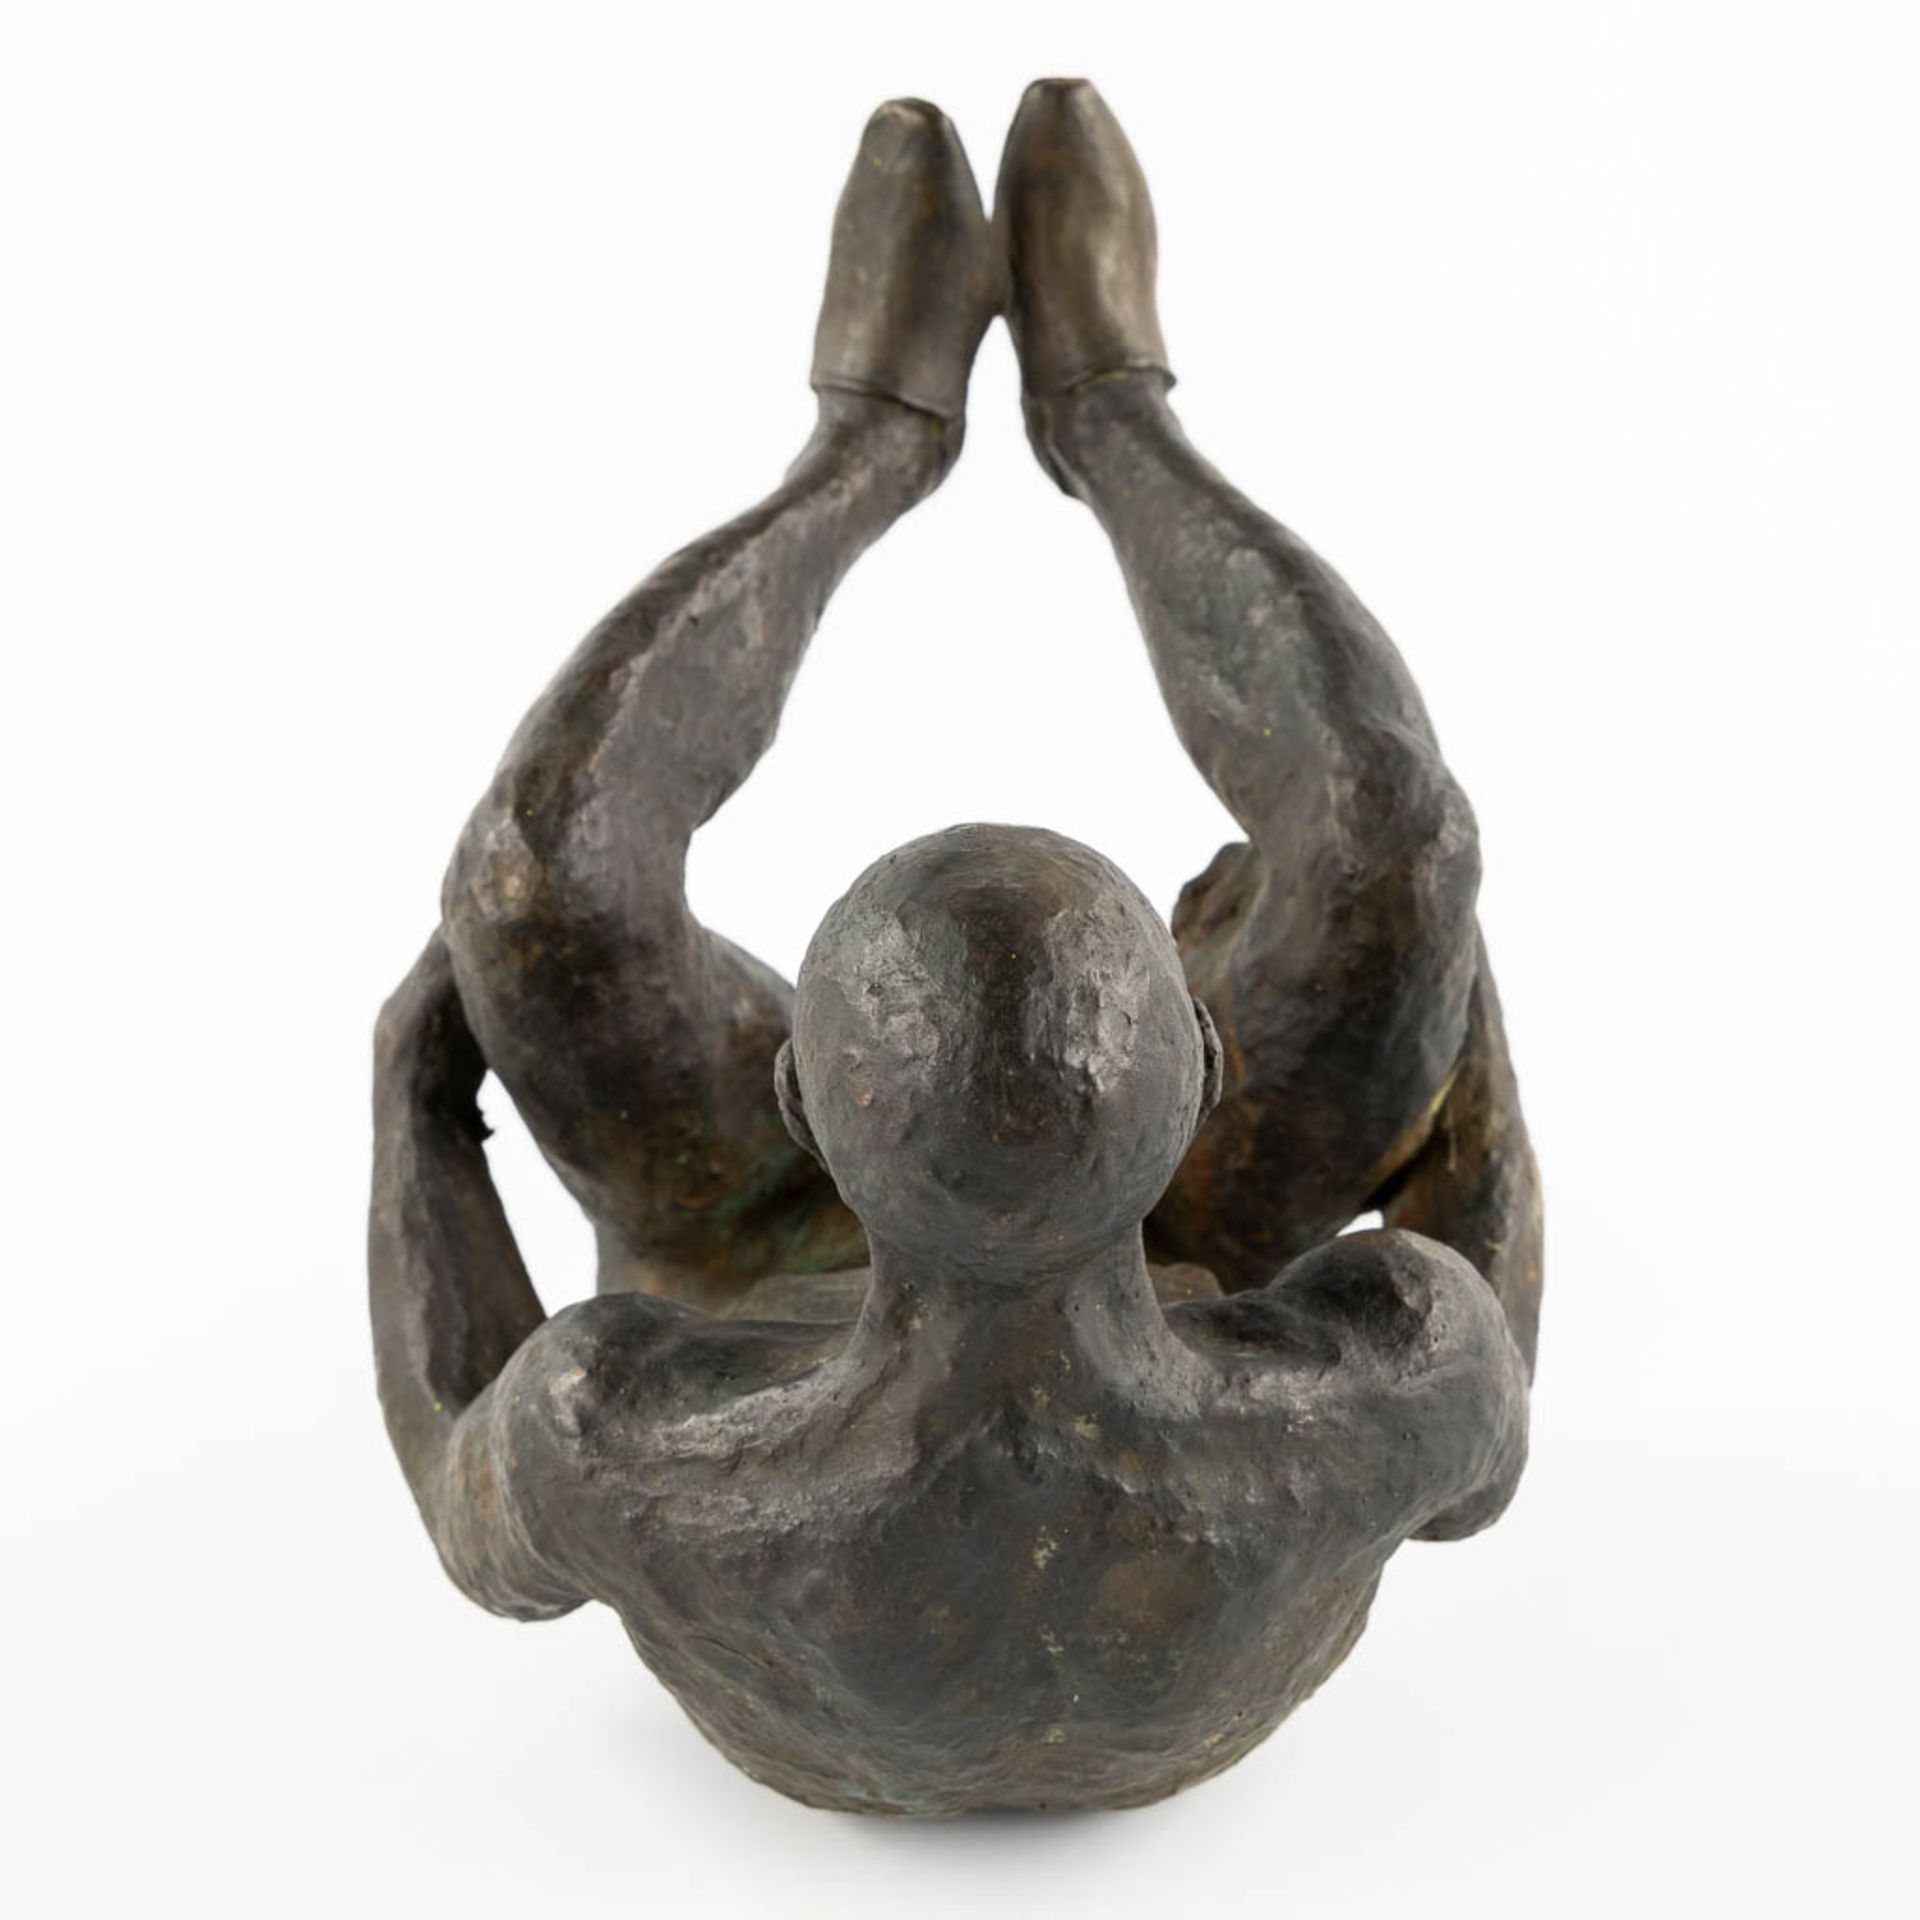 An Exposed Male figure' patinated bronze. (L:22 x W:30 x H:29 cm) - Image 4 of 9